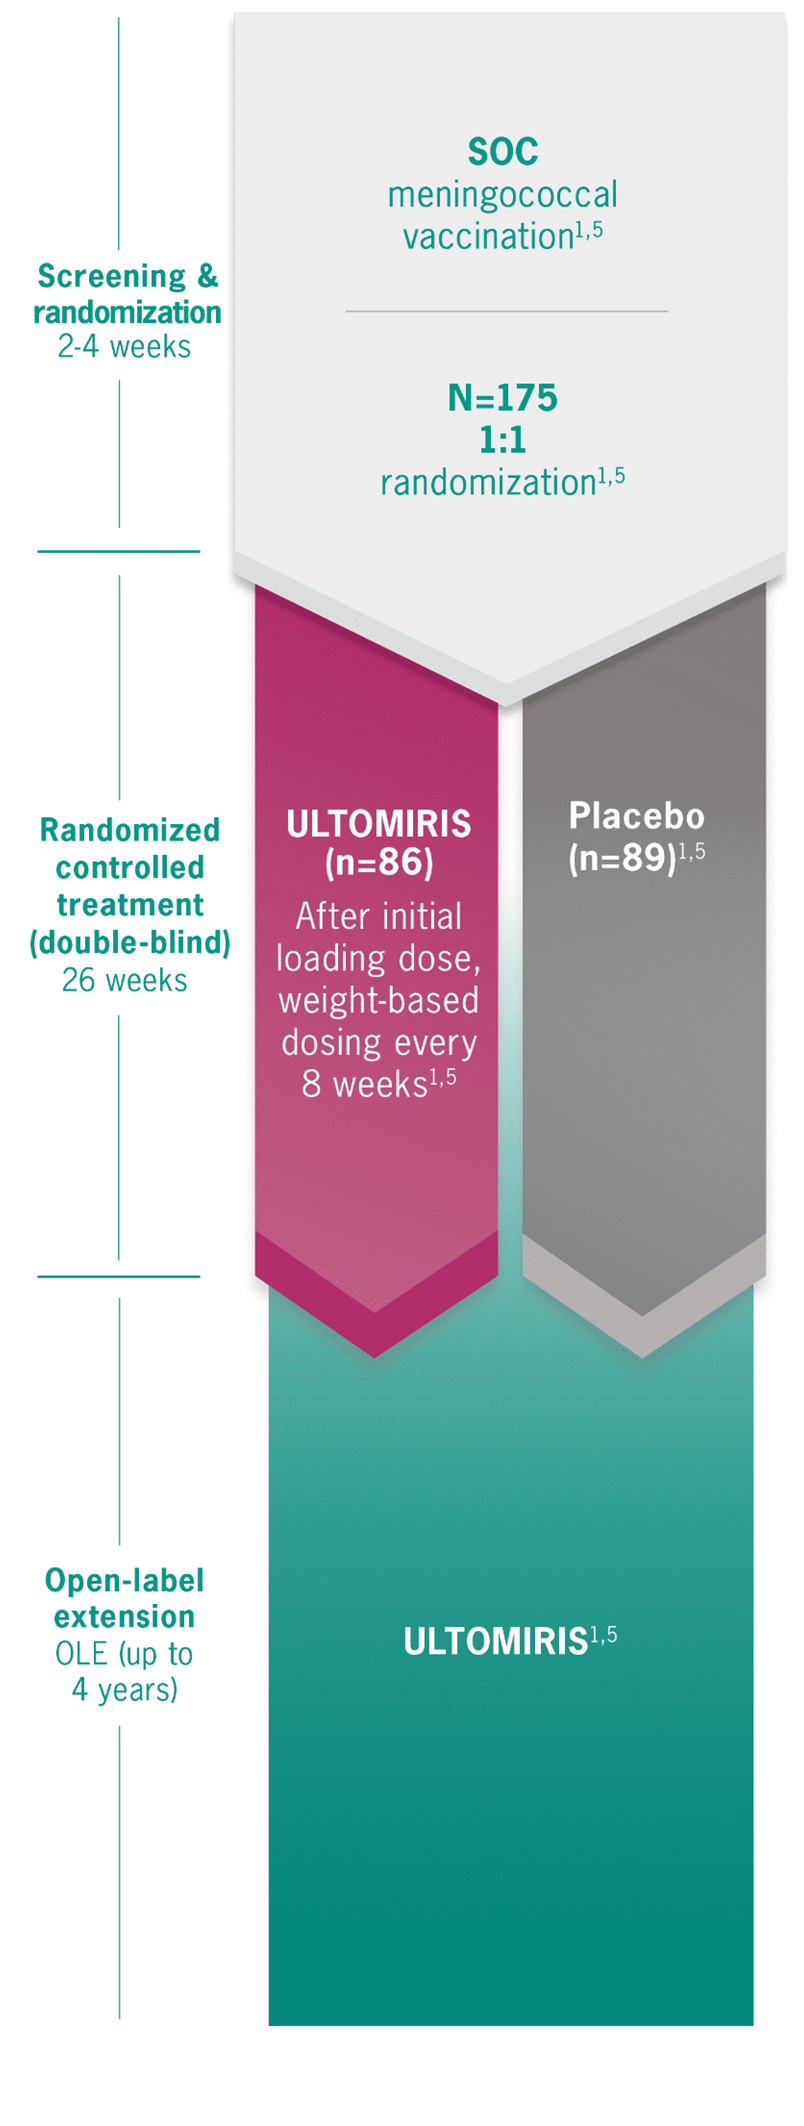 ULTOMIRIS vs placebo randomized trial design: Screening & randomization for 2-4 weeks, randomized- controlled treatment (double-blind) for 26 weeks, and open-label extension for up to 4 years.